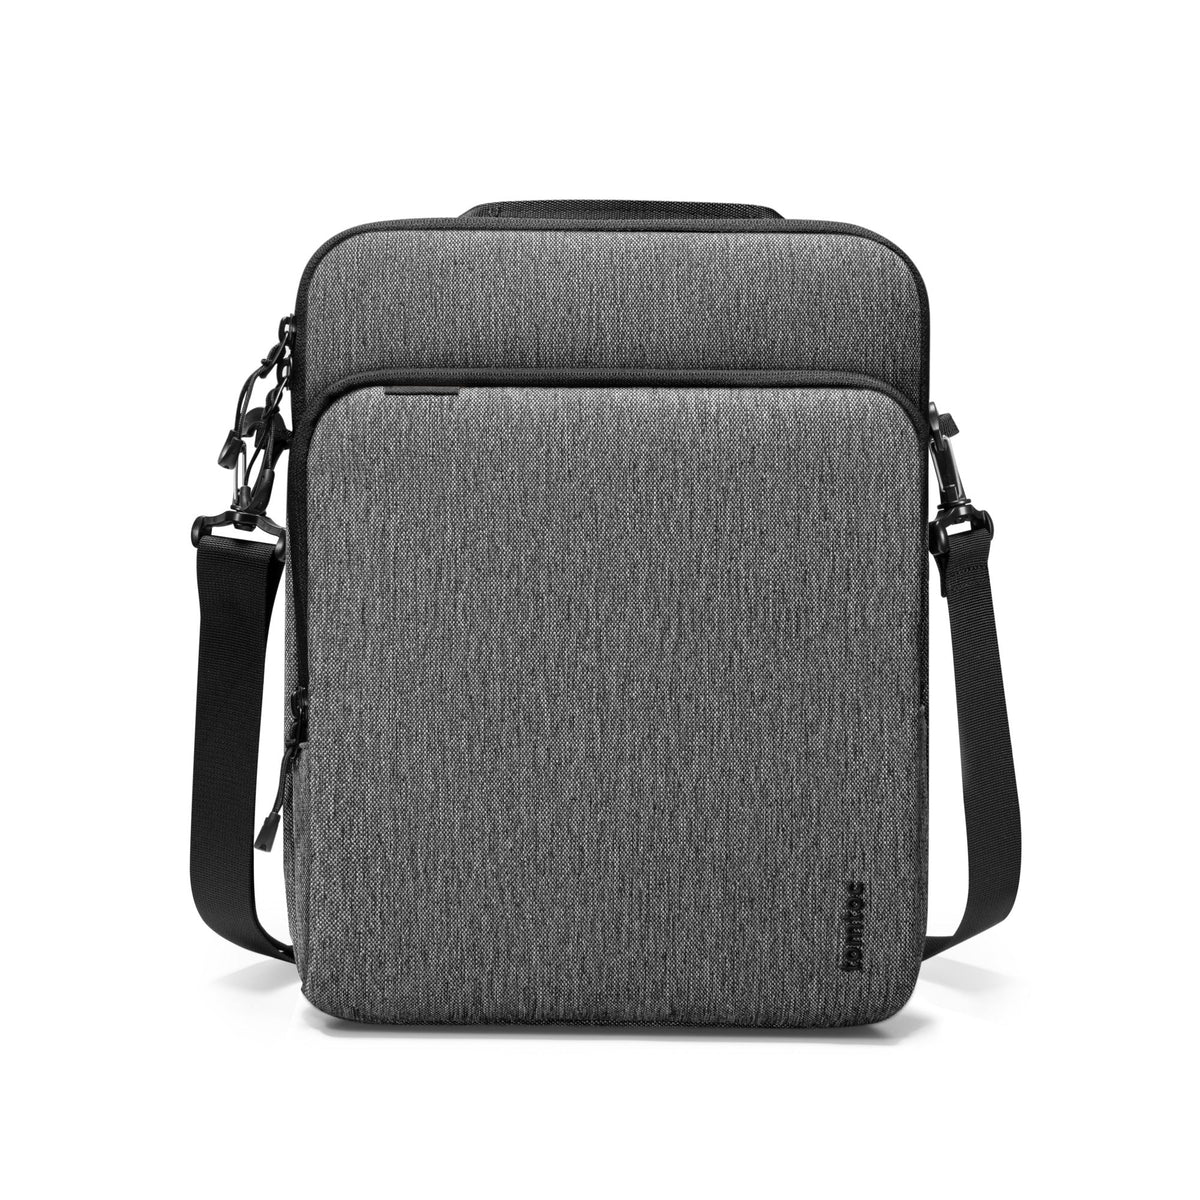 primary_DefenderACE-H13 Tablet Shoulder Bag for 11-inch iPad Pro | Gray